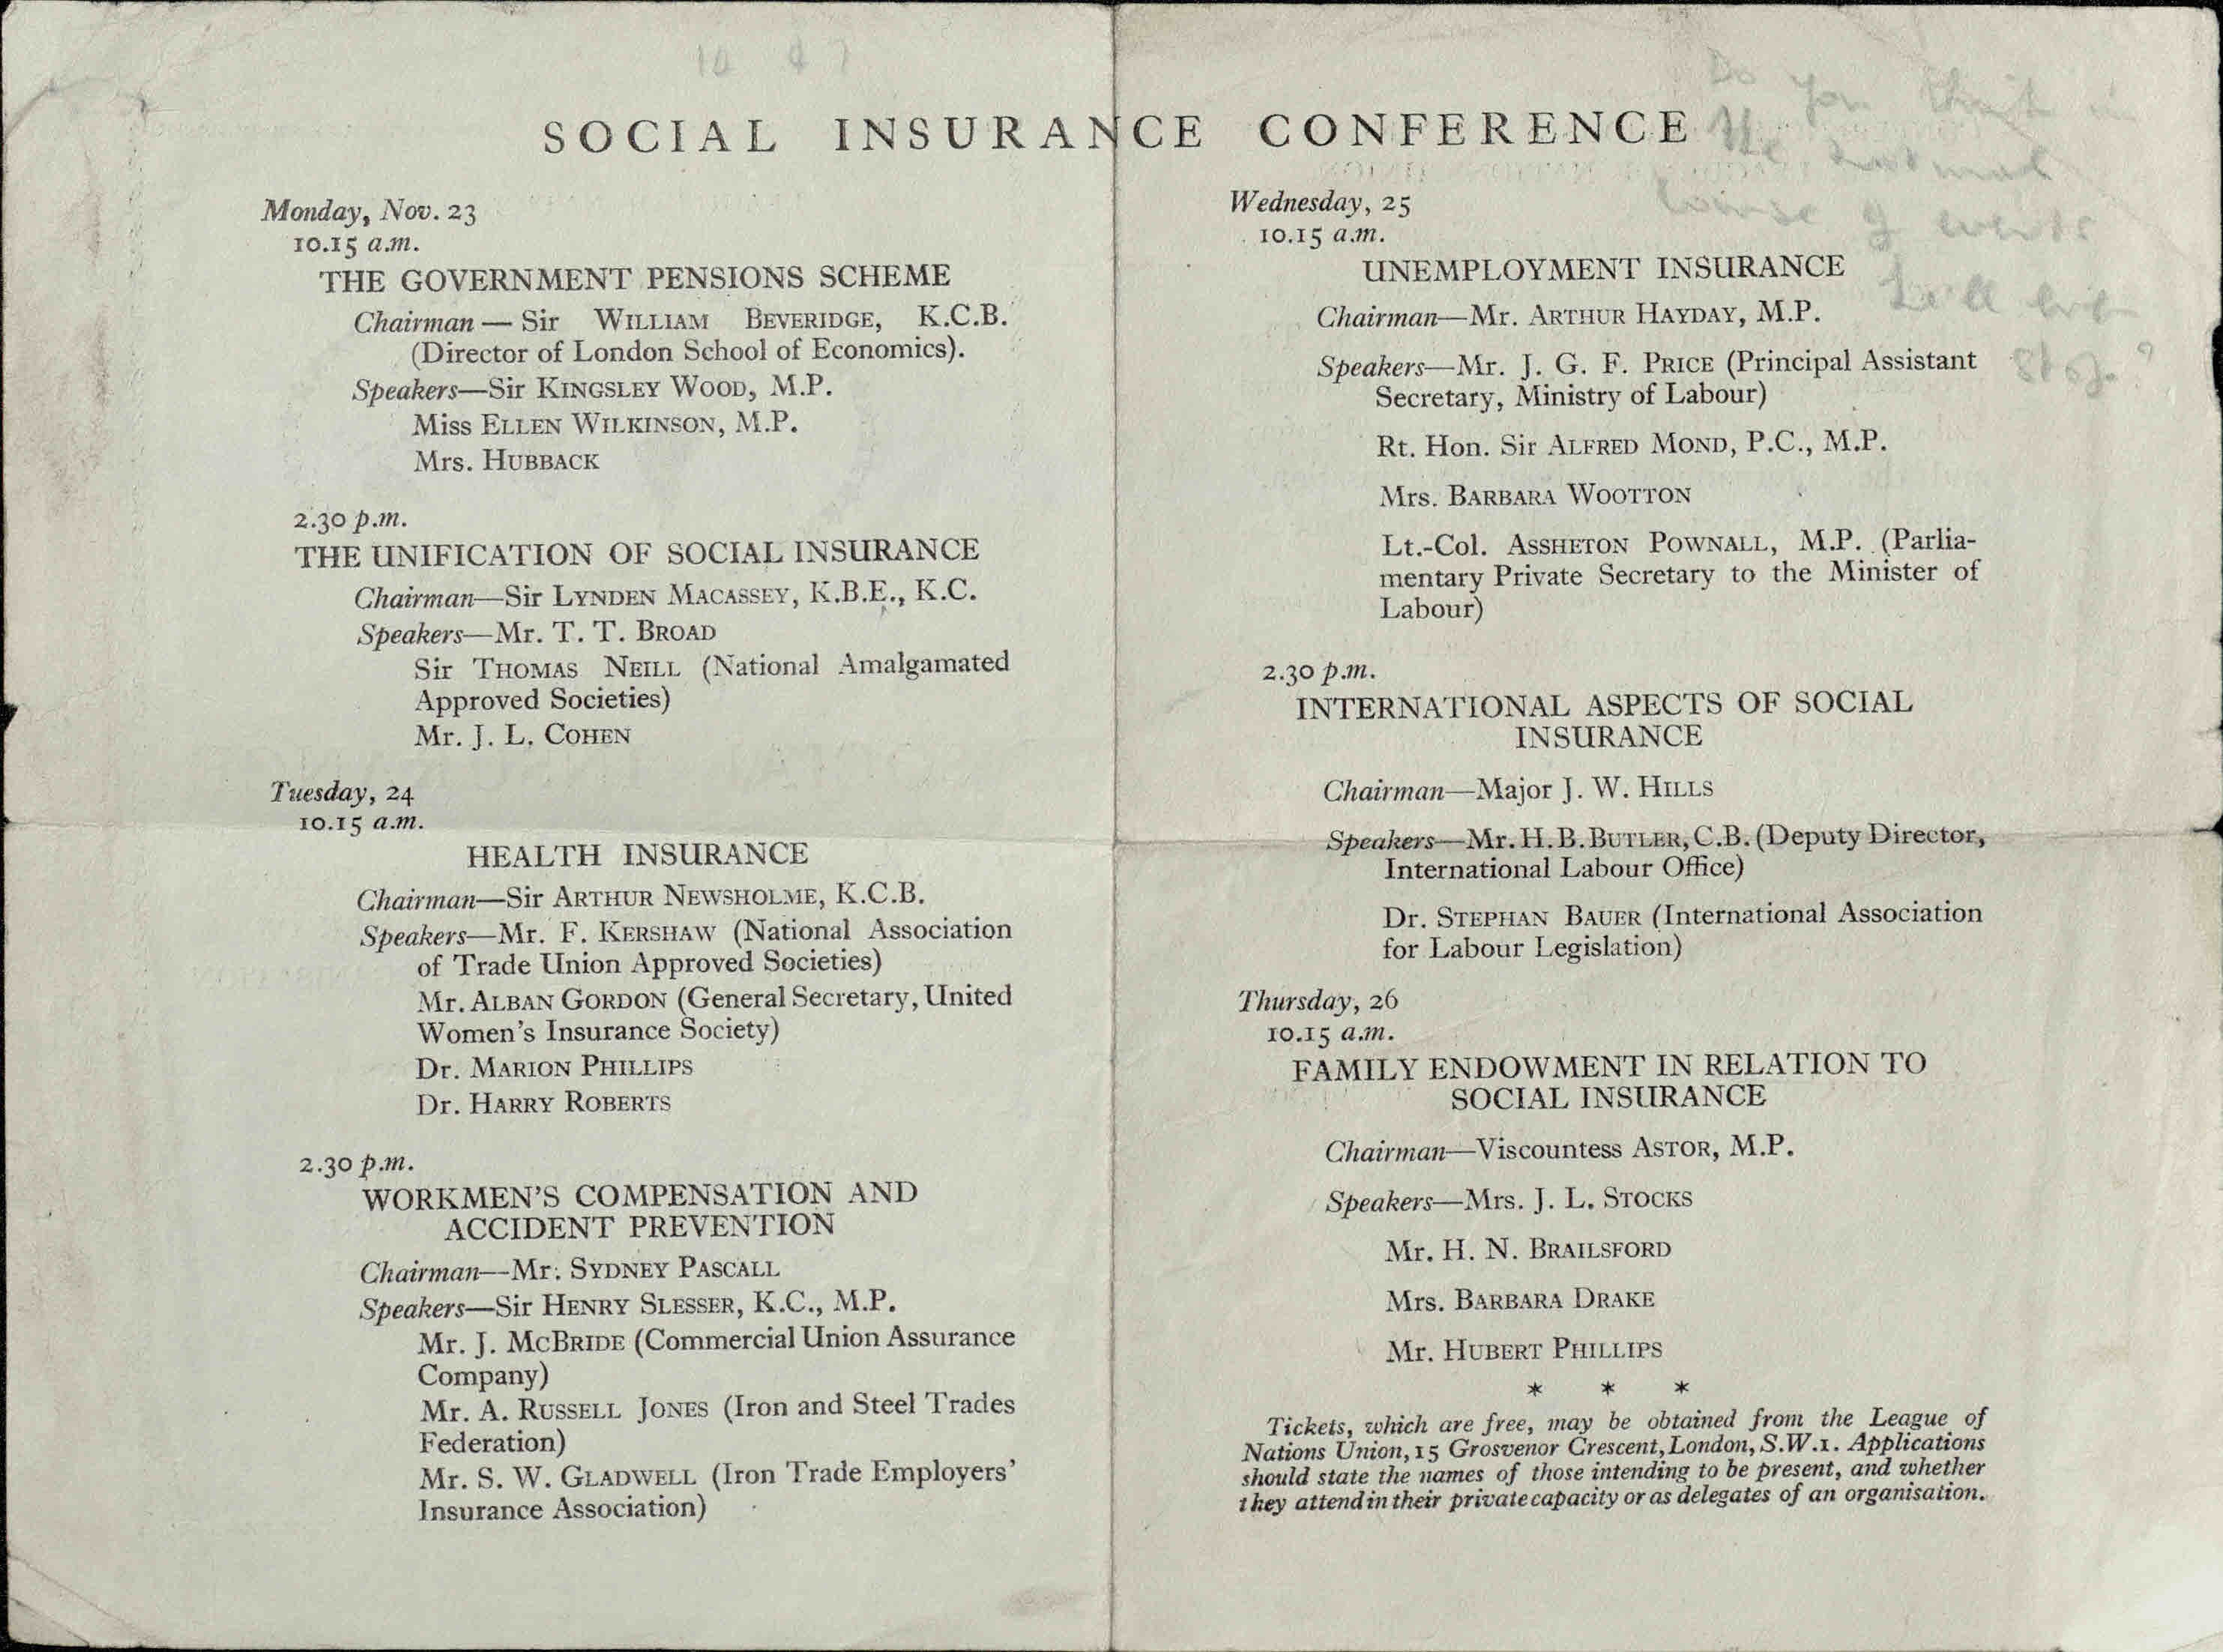 Programme for social insurance conference at the LSE, November 1925